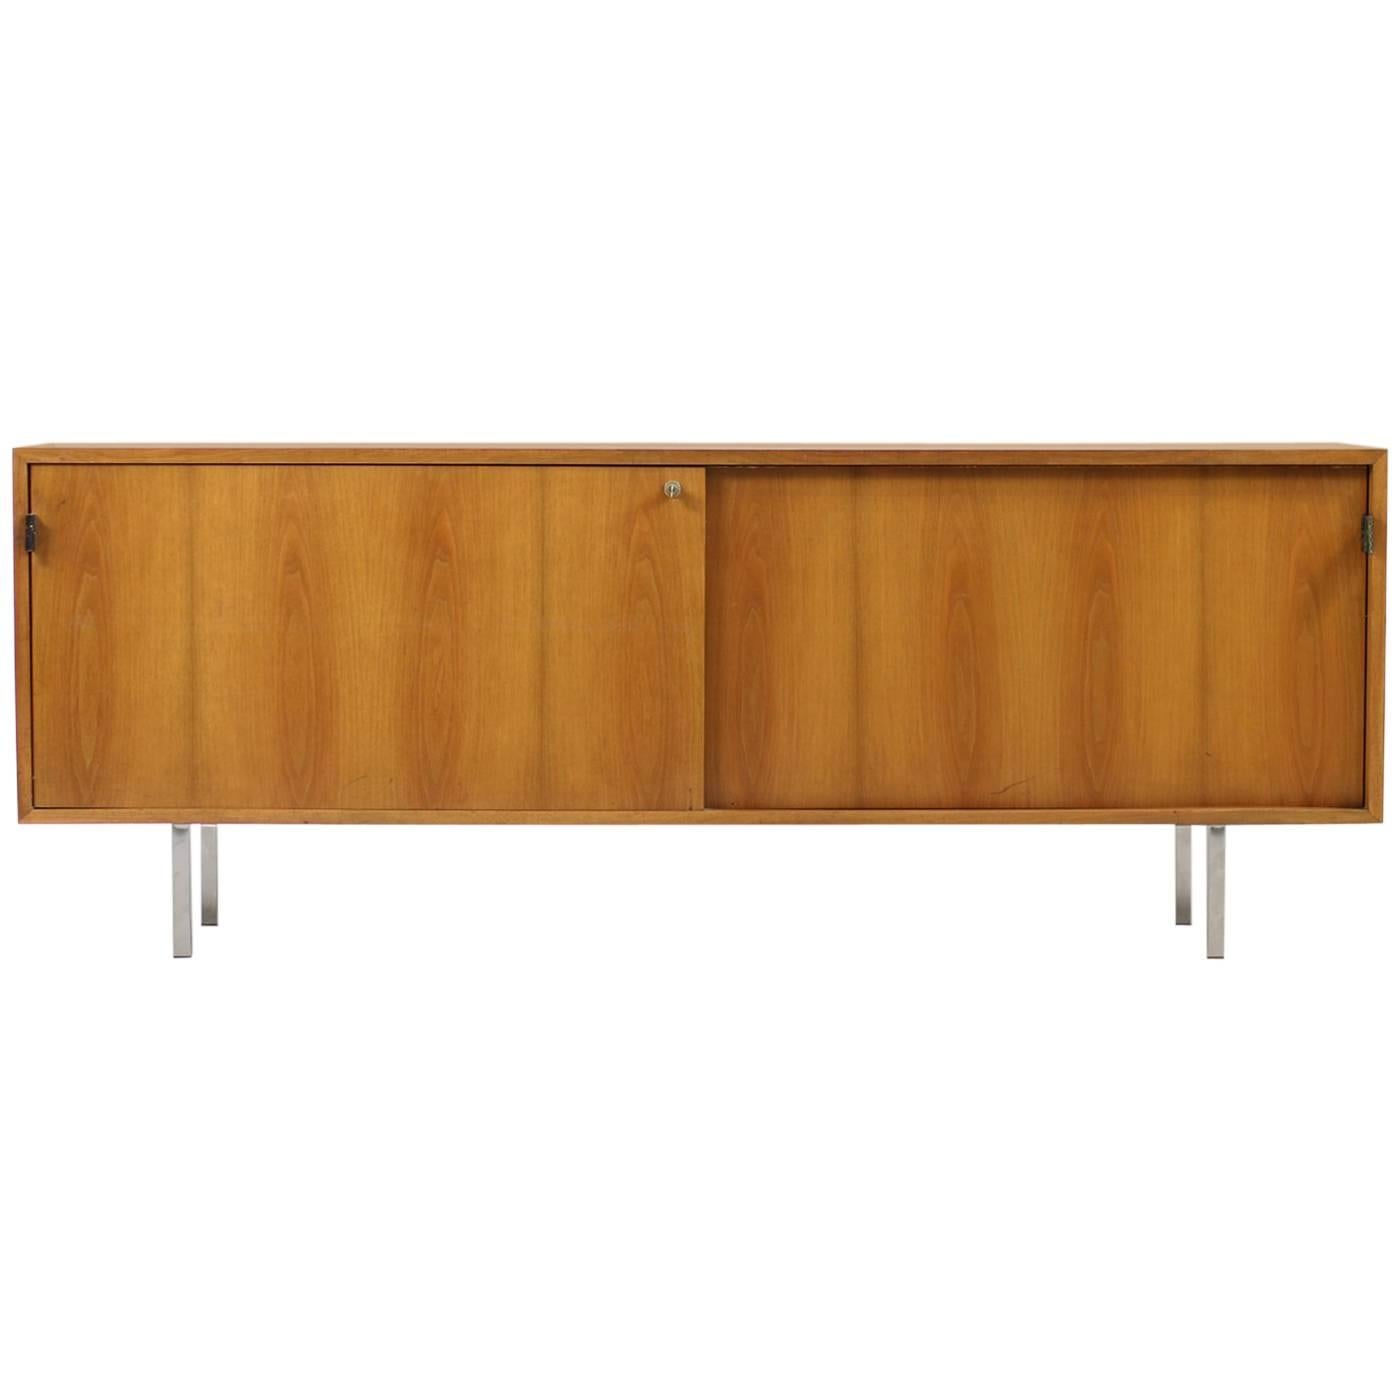 Rare 1950s Florence Knoll Mod. 116 Cherrywood Sideboard Knoll International For Sale